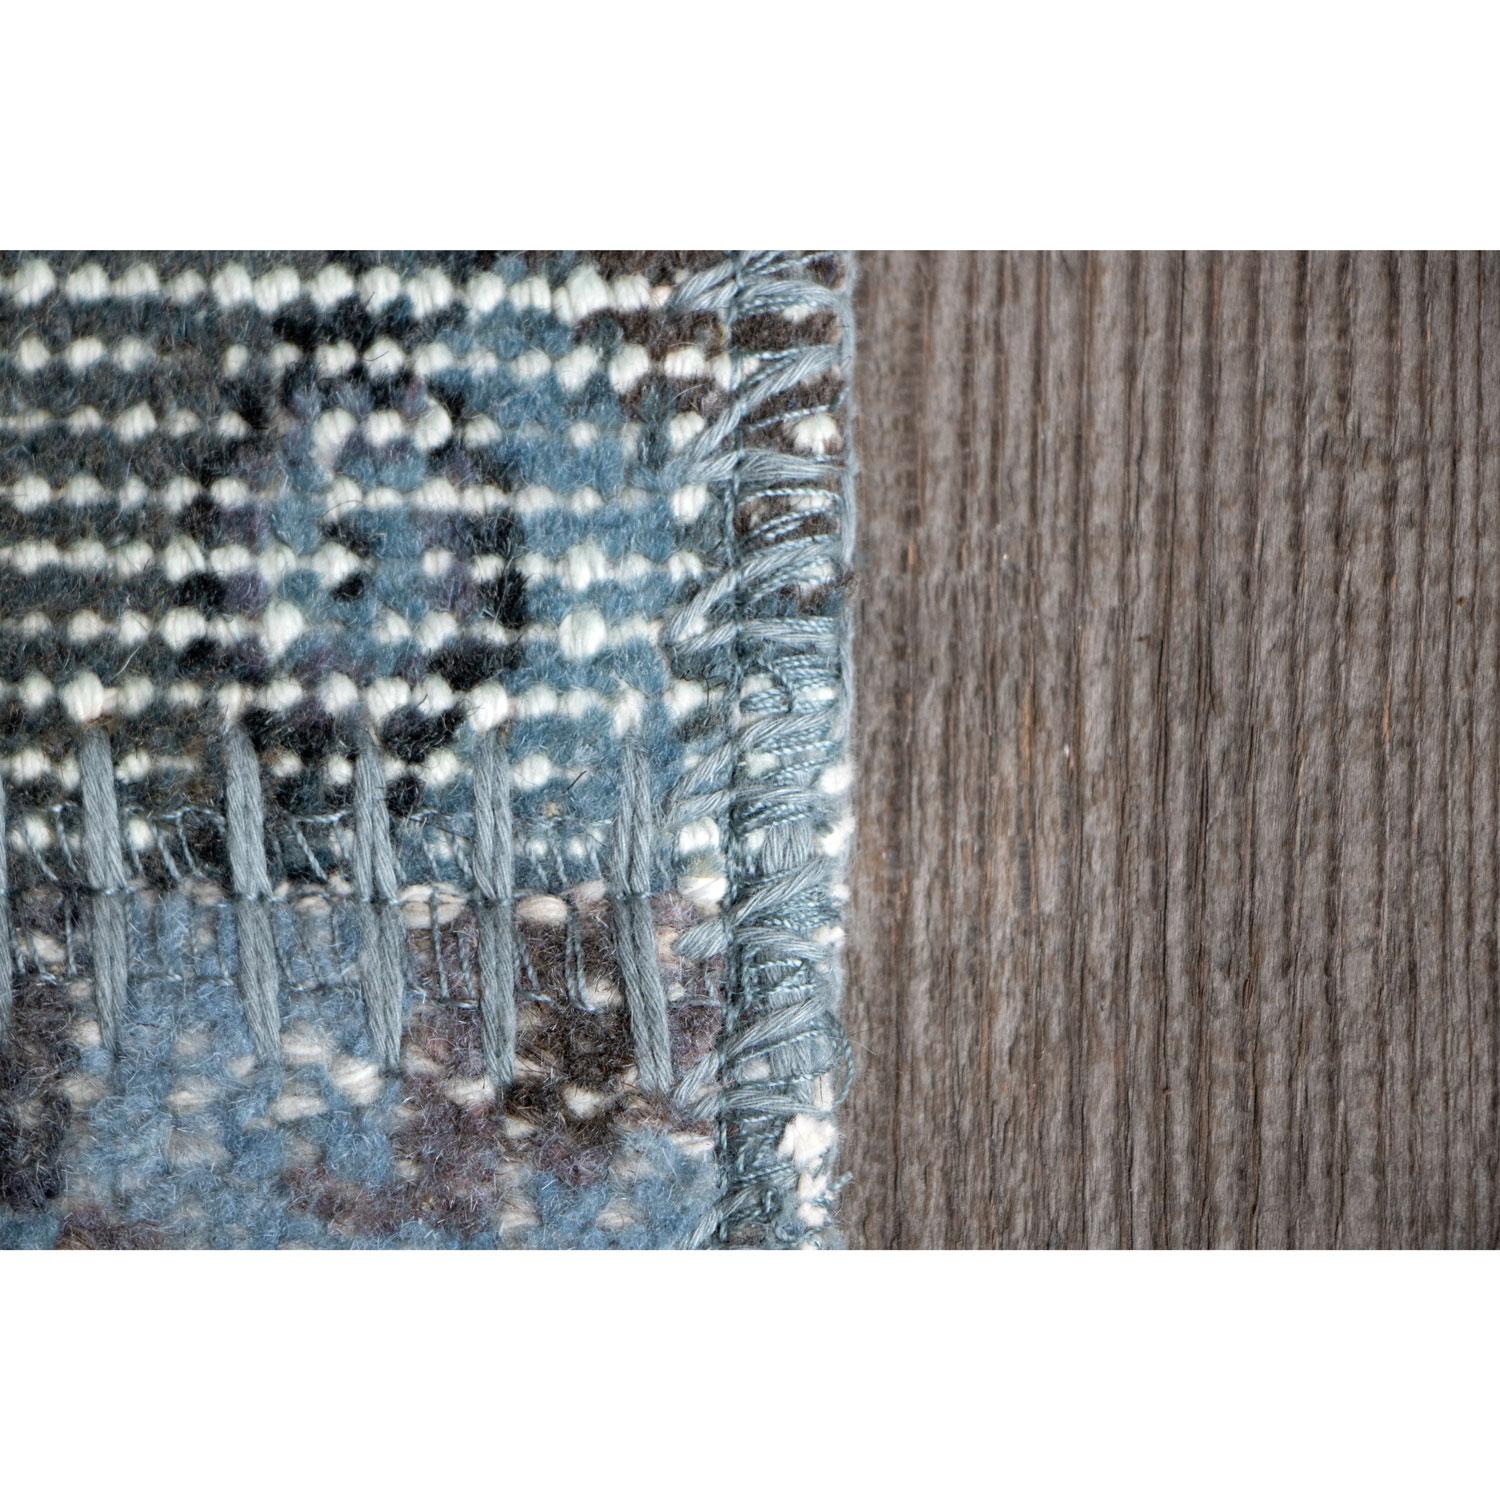 Antique Chic Vintage Blue Brown Wool Cotton Rug by Deanna Comellini 250x350 cm For Sale 5